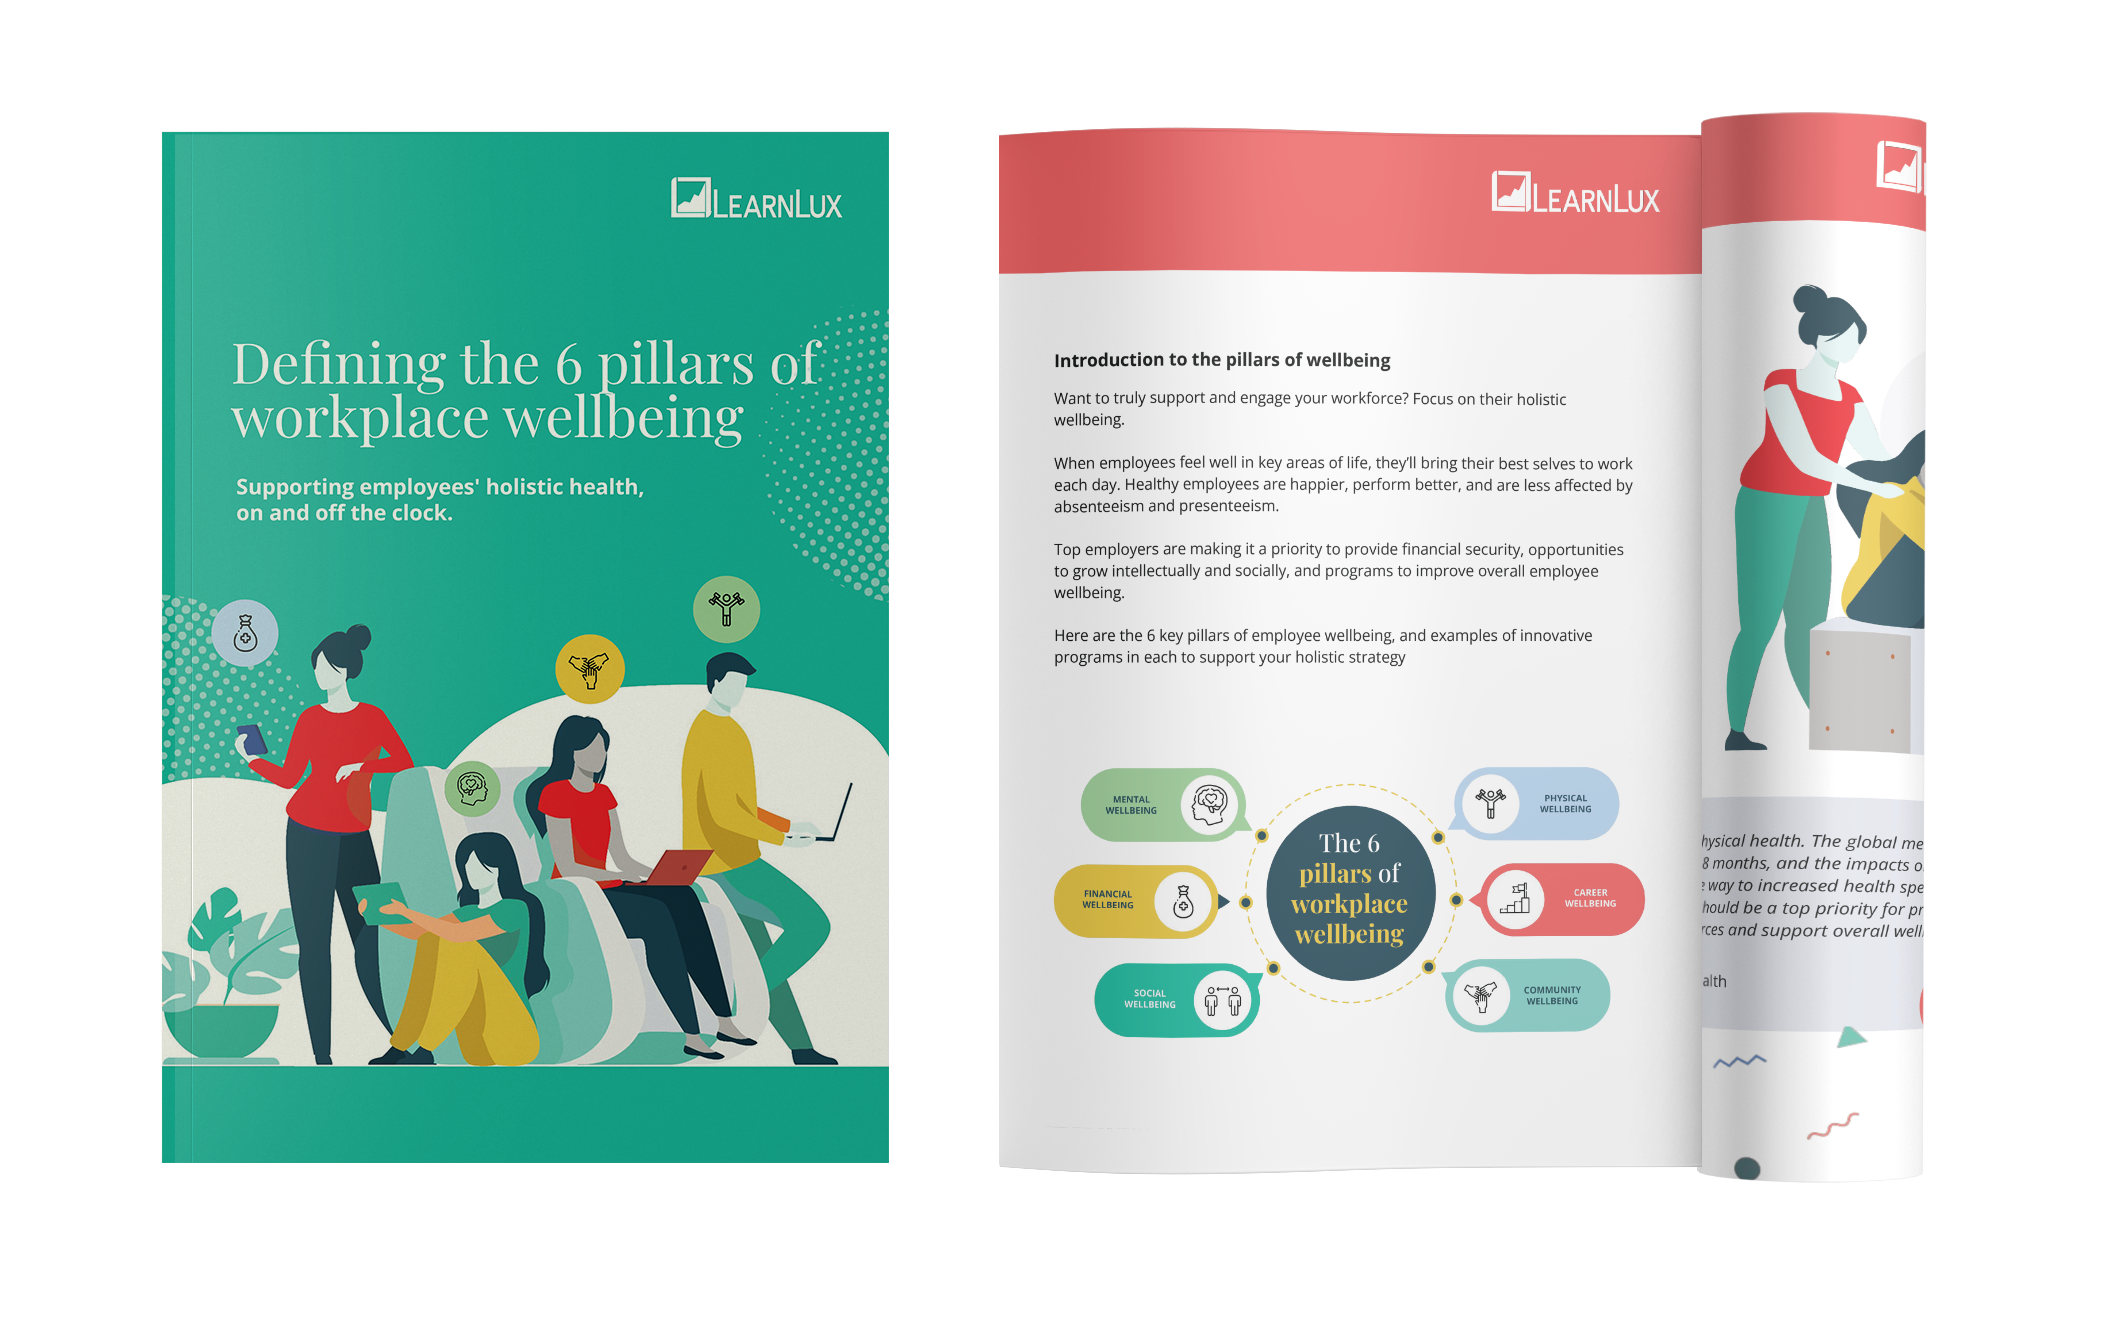 Financial wellbeing is one pillar of workplace wellbeing